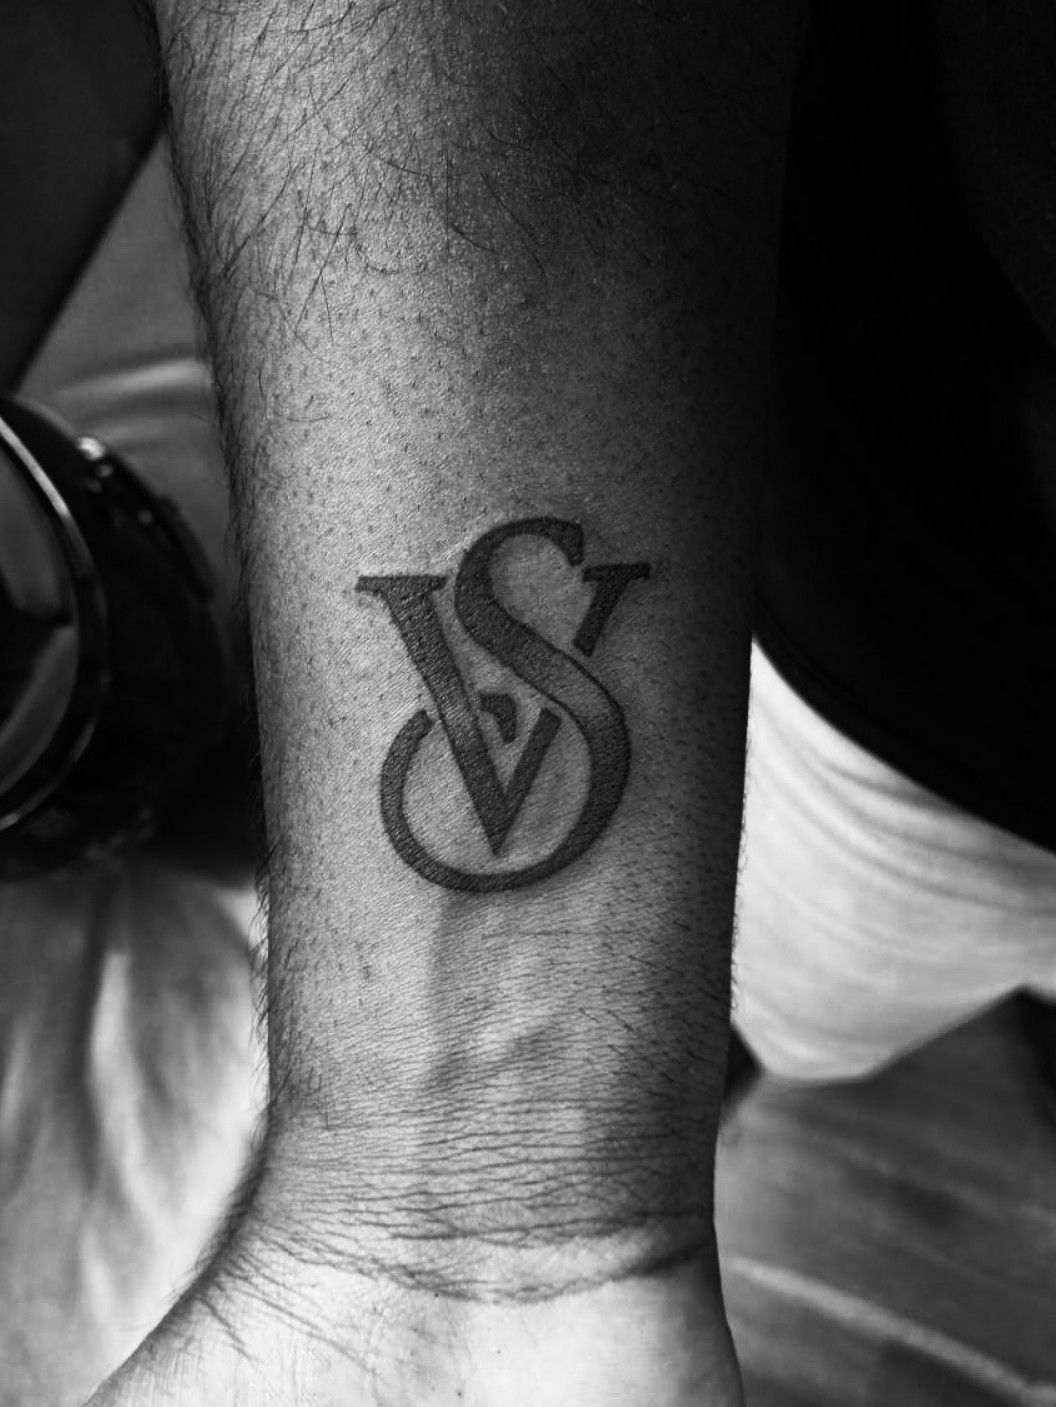 SV heartigram Union This heart tattoo was created with a single line  that designes the letters SV and it symb  Tattoo lettering V letter  tattoo Union tattoo